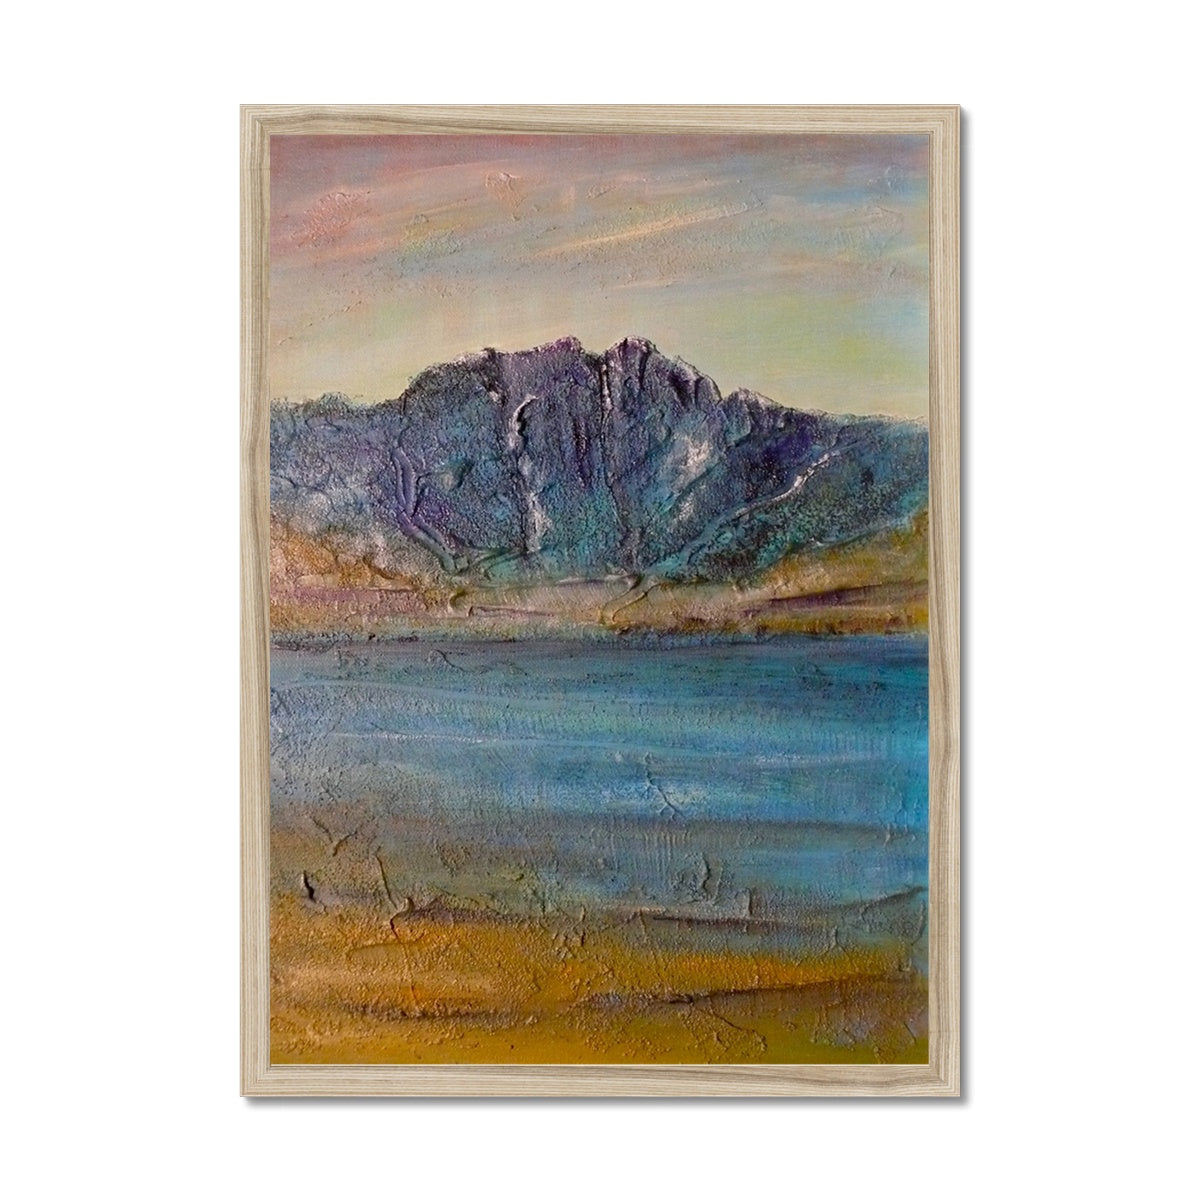 Torridon Painting | Framed Prints From Scotland-Framed Prints-Scottish Lochs & Mountains Art Gallery-A2 Portrait-Natural Frame-Paintings, Prints, Homeware, Art Gifts From Scotland By Scottish Artist Kevin Hunter